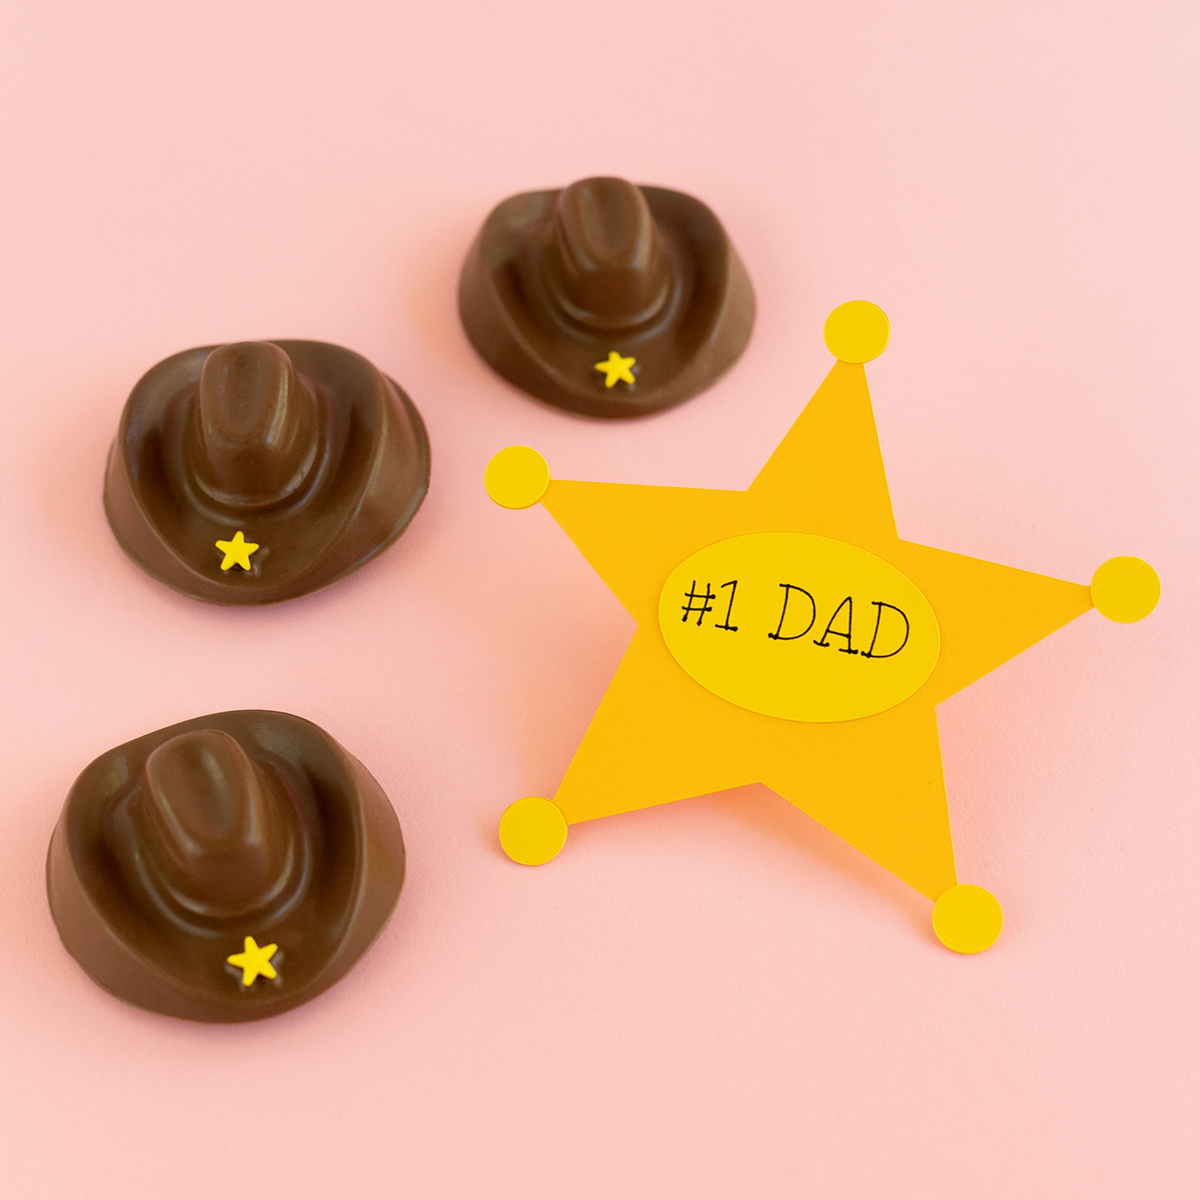 Cowboy chocolates with Father's Day badge.